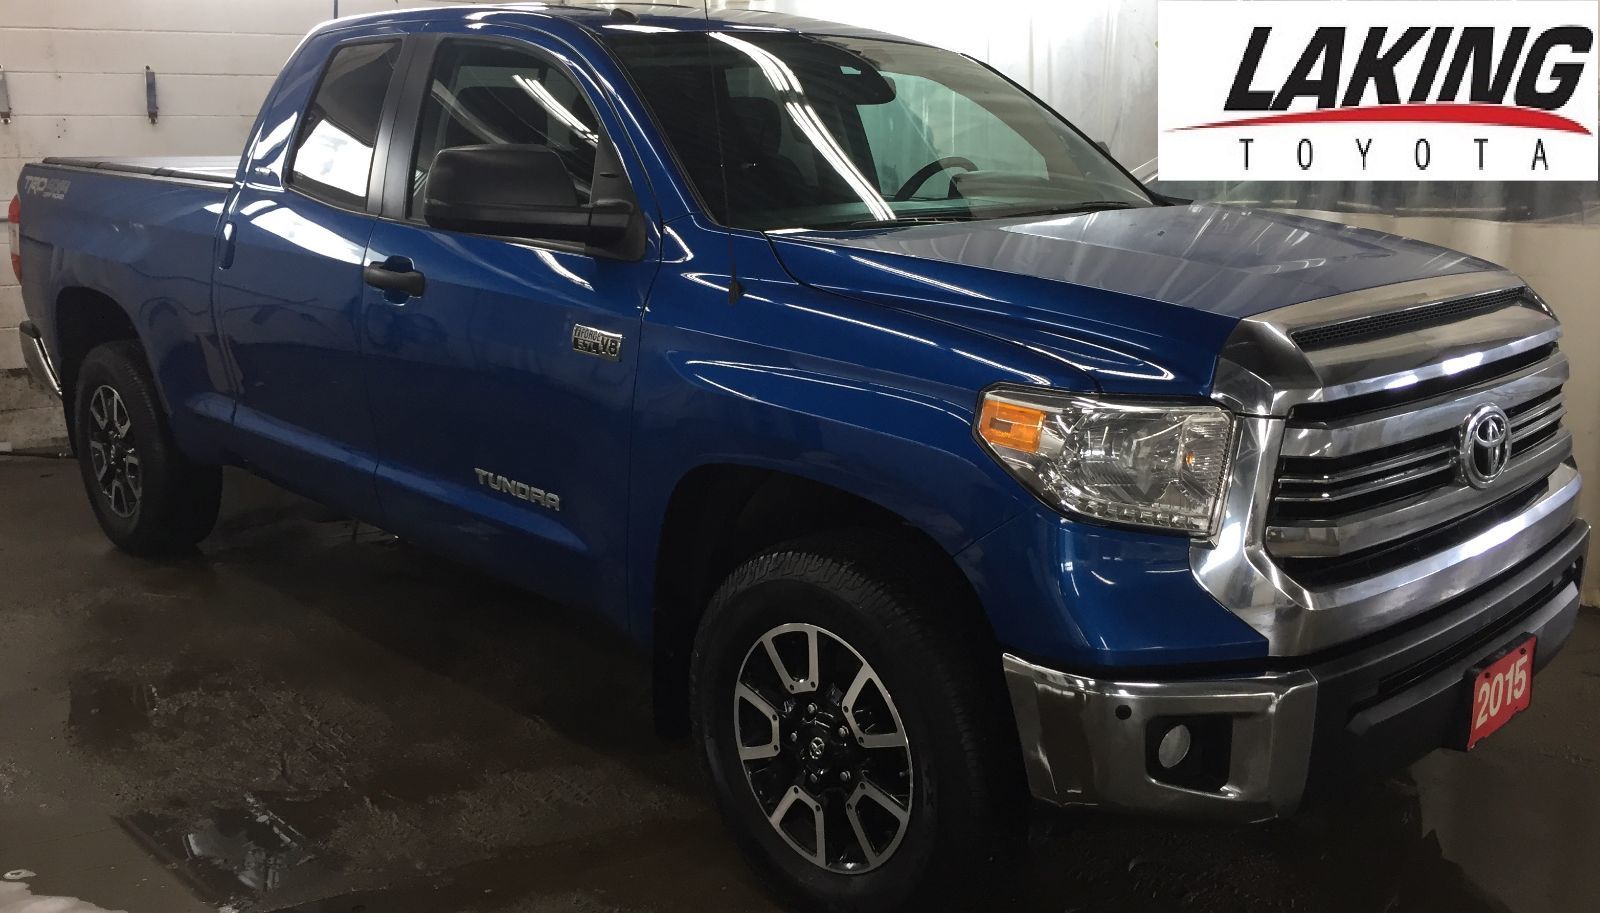 Used 2016 Toyota Tundra SR5 4X4 6.5 BOX "A REAL WORKHORSE OF A PICKUP